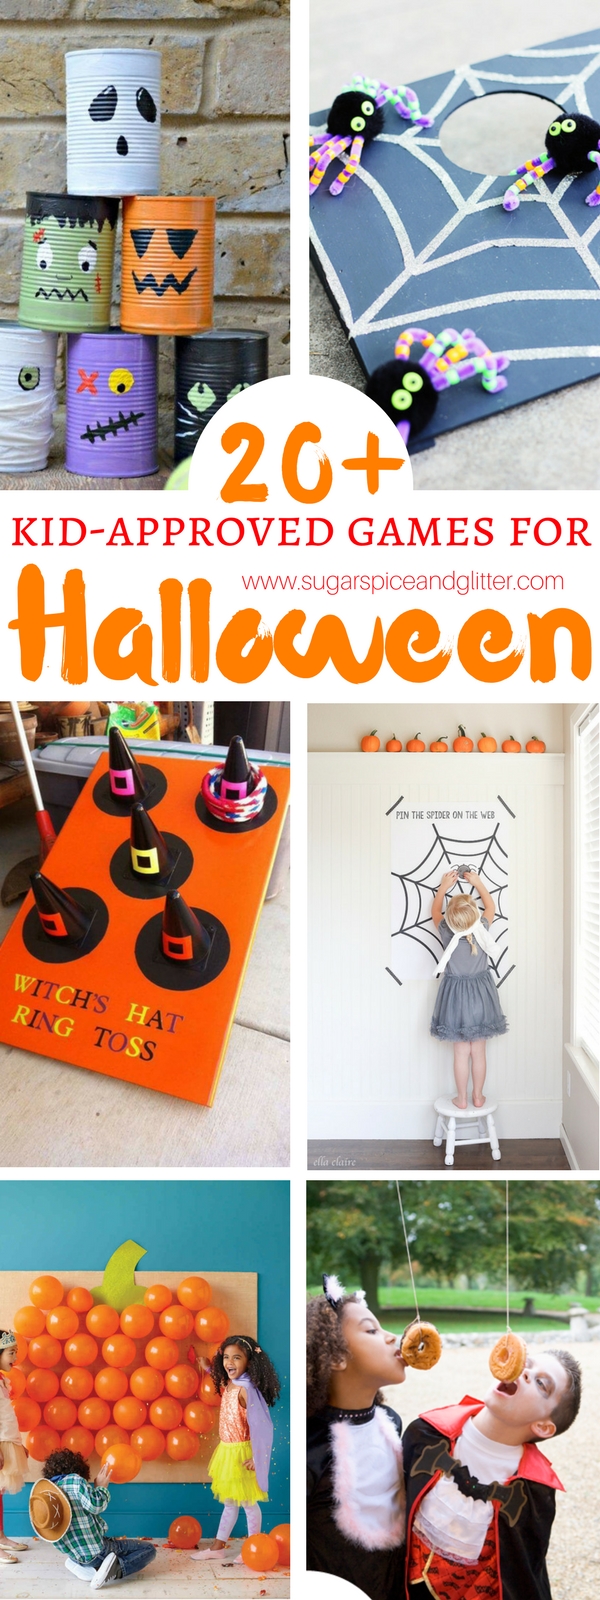 Halloween Party Favor Pumpkin Ghost Toss Game with Bean Bags Halloween Inflatable Spider and Witch Hat Ring Toss Game for Kids ThinkMax Halloween Toss Games Halloween Toys Halloween Games 